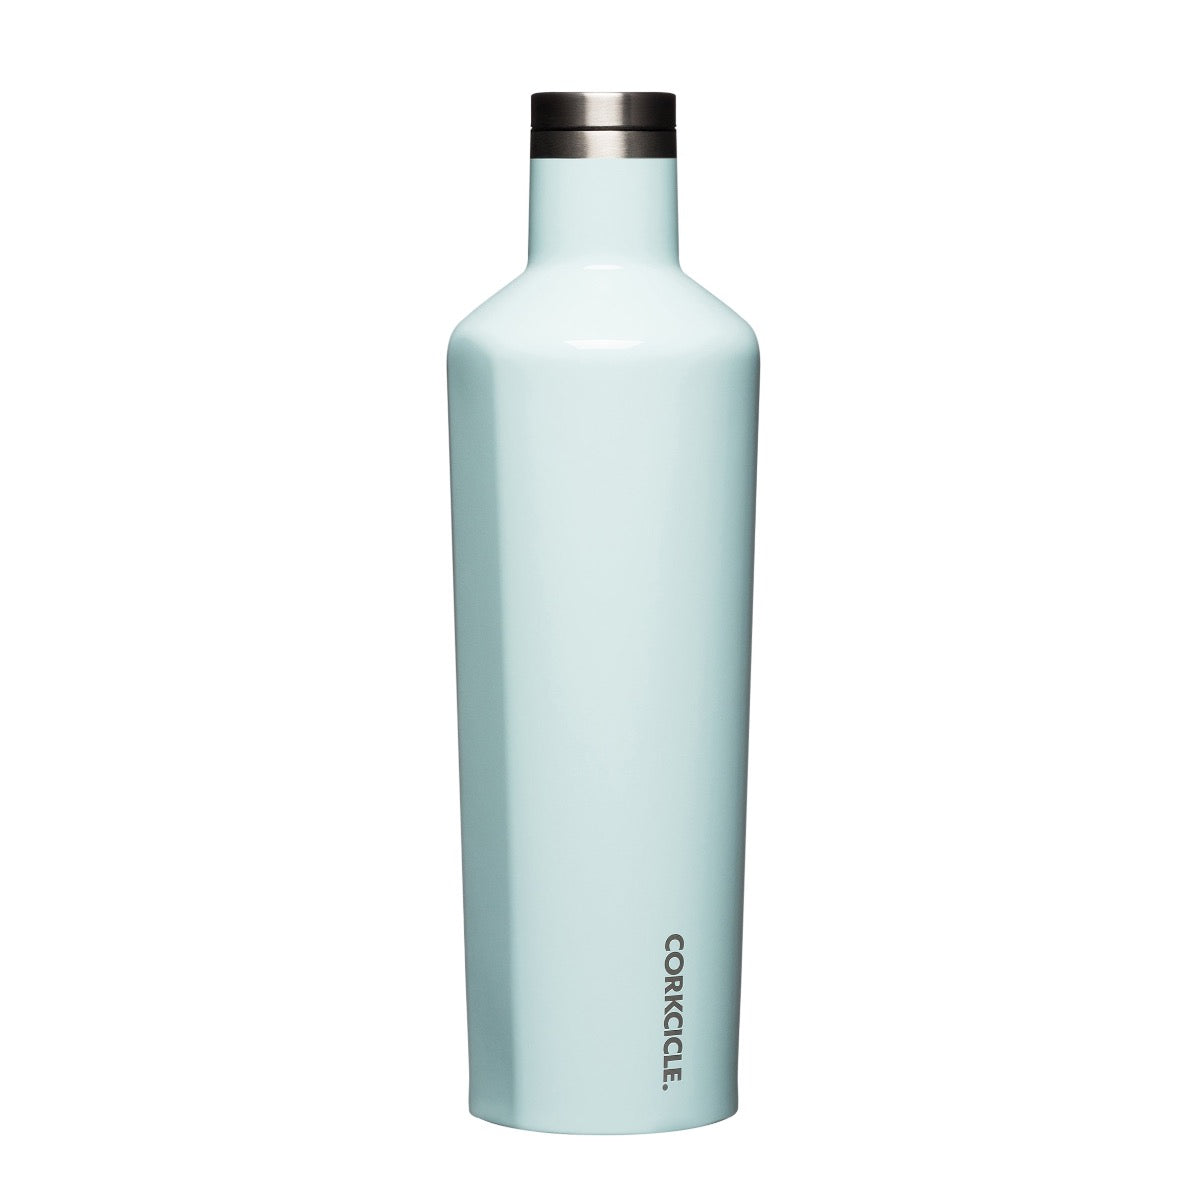 Corkcicle Classic Canteen 475ml - Powder Blue - Insulated Stainless Steel Bottle